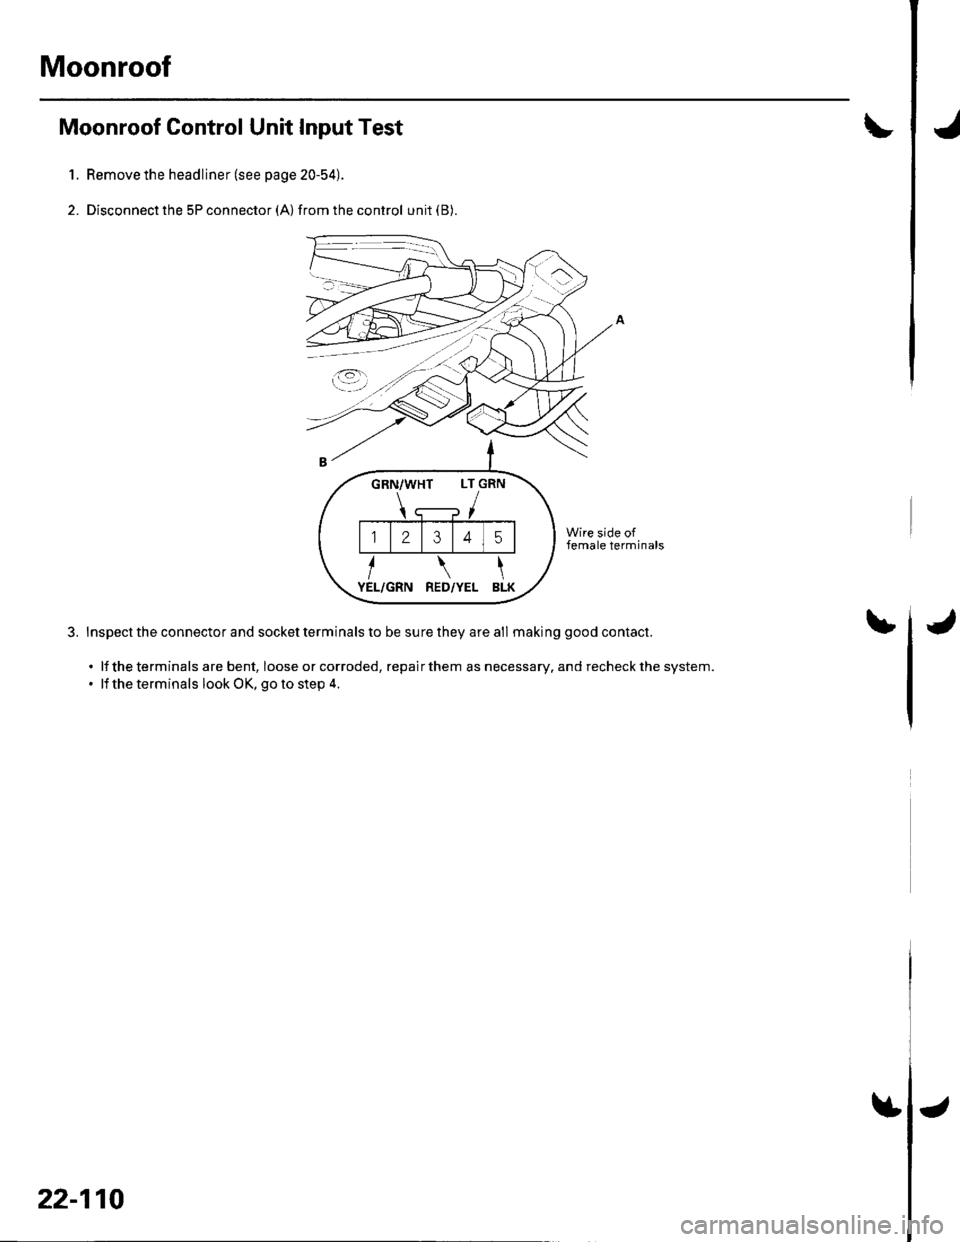 HONDA CIVIC 2003 7.G Workshop Manual Moonroof
Moonroof Control Unit Input Test
Remove the headliner (see page 20-54).
Disconnect the 5P connector (A) from the control unit (B).
Wire side offemale terminals
Inspect the connector and socke